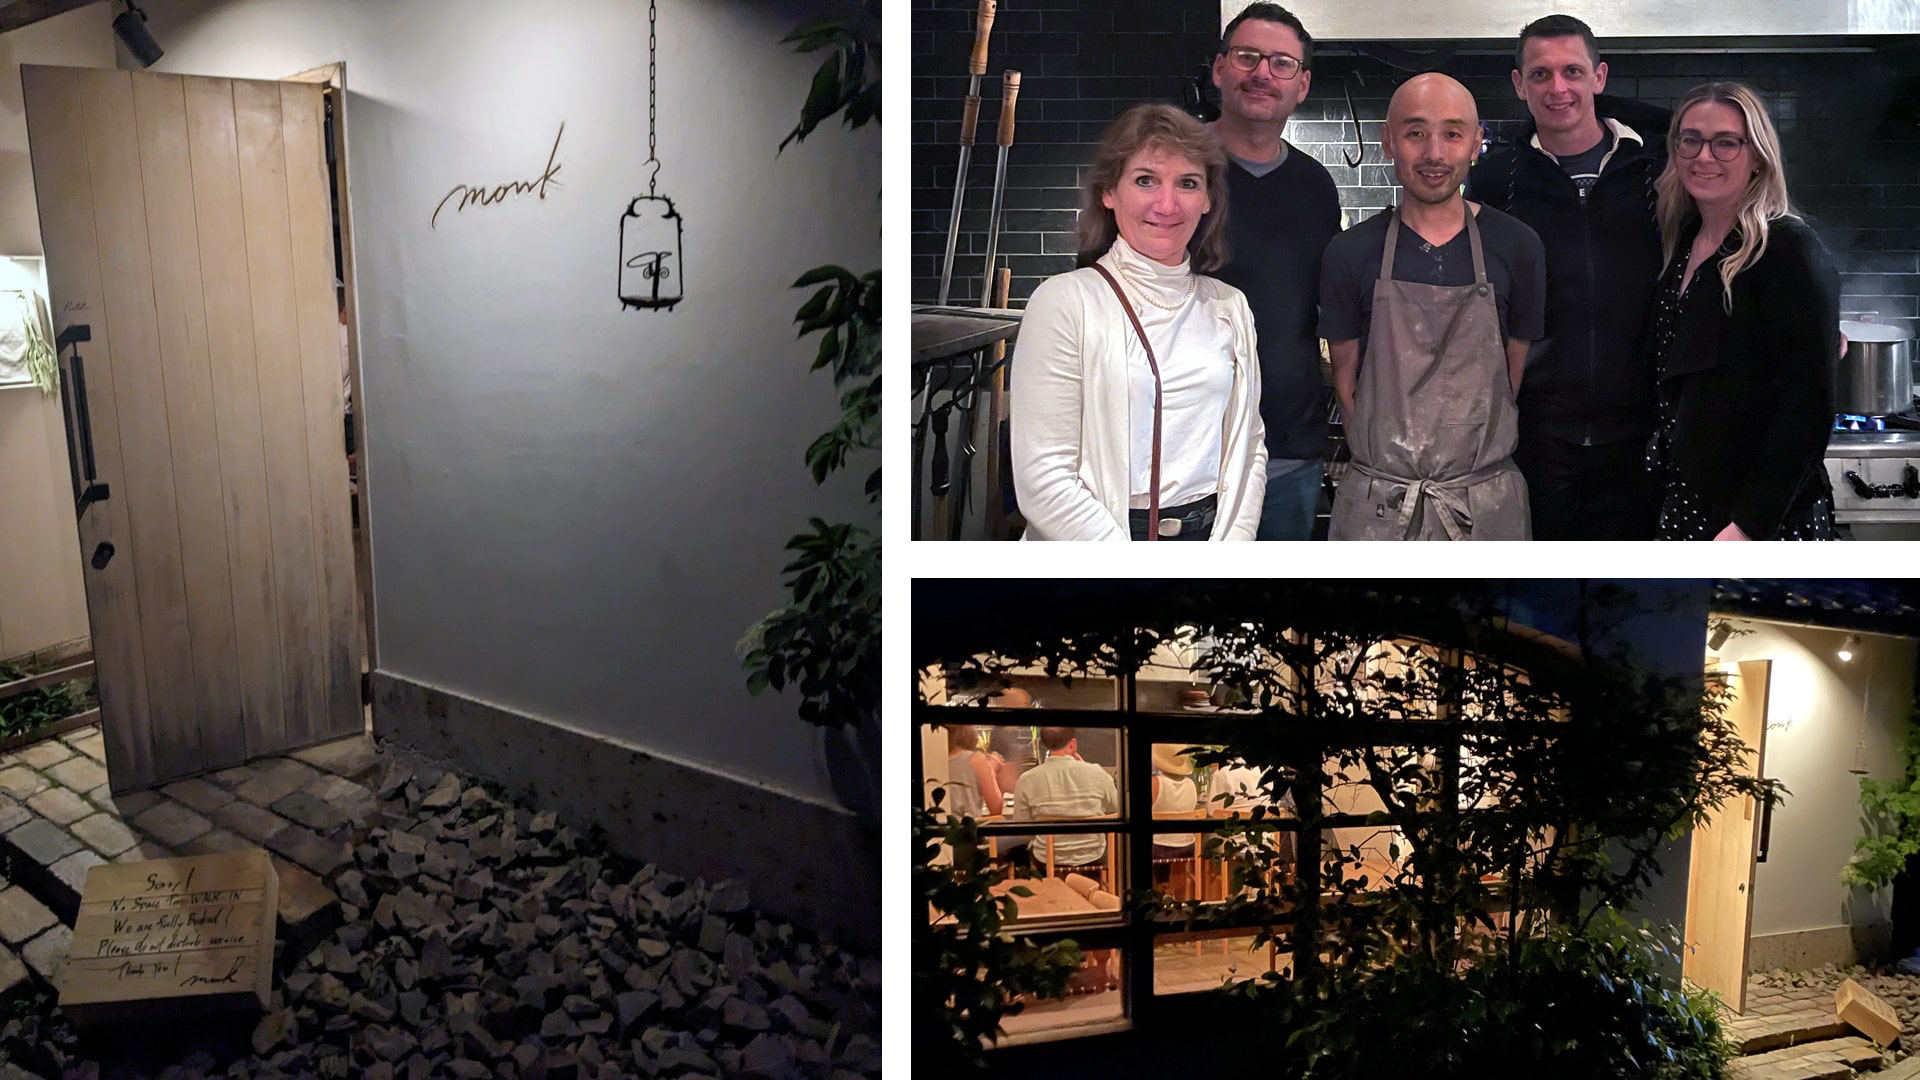 Scenes from Restaurant Monk, clockwise: Exterior of the restaurant; view of the JWU chefs with Monk owner Yoshihiro Imai; and below right, exterior view at night.